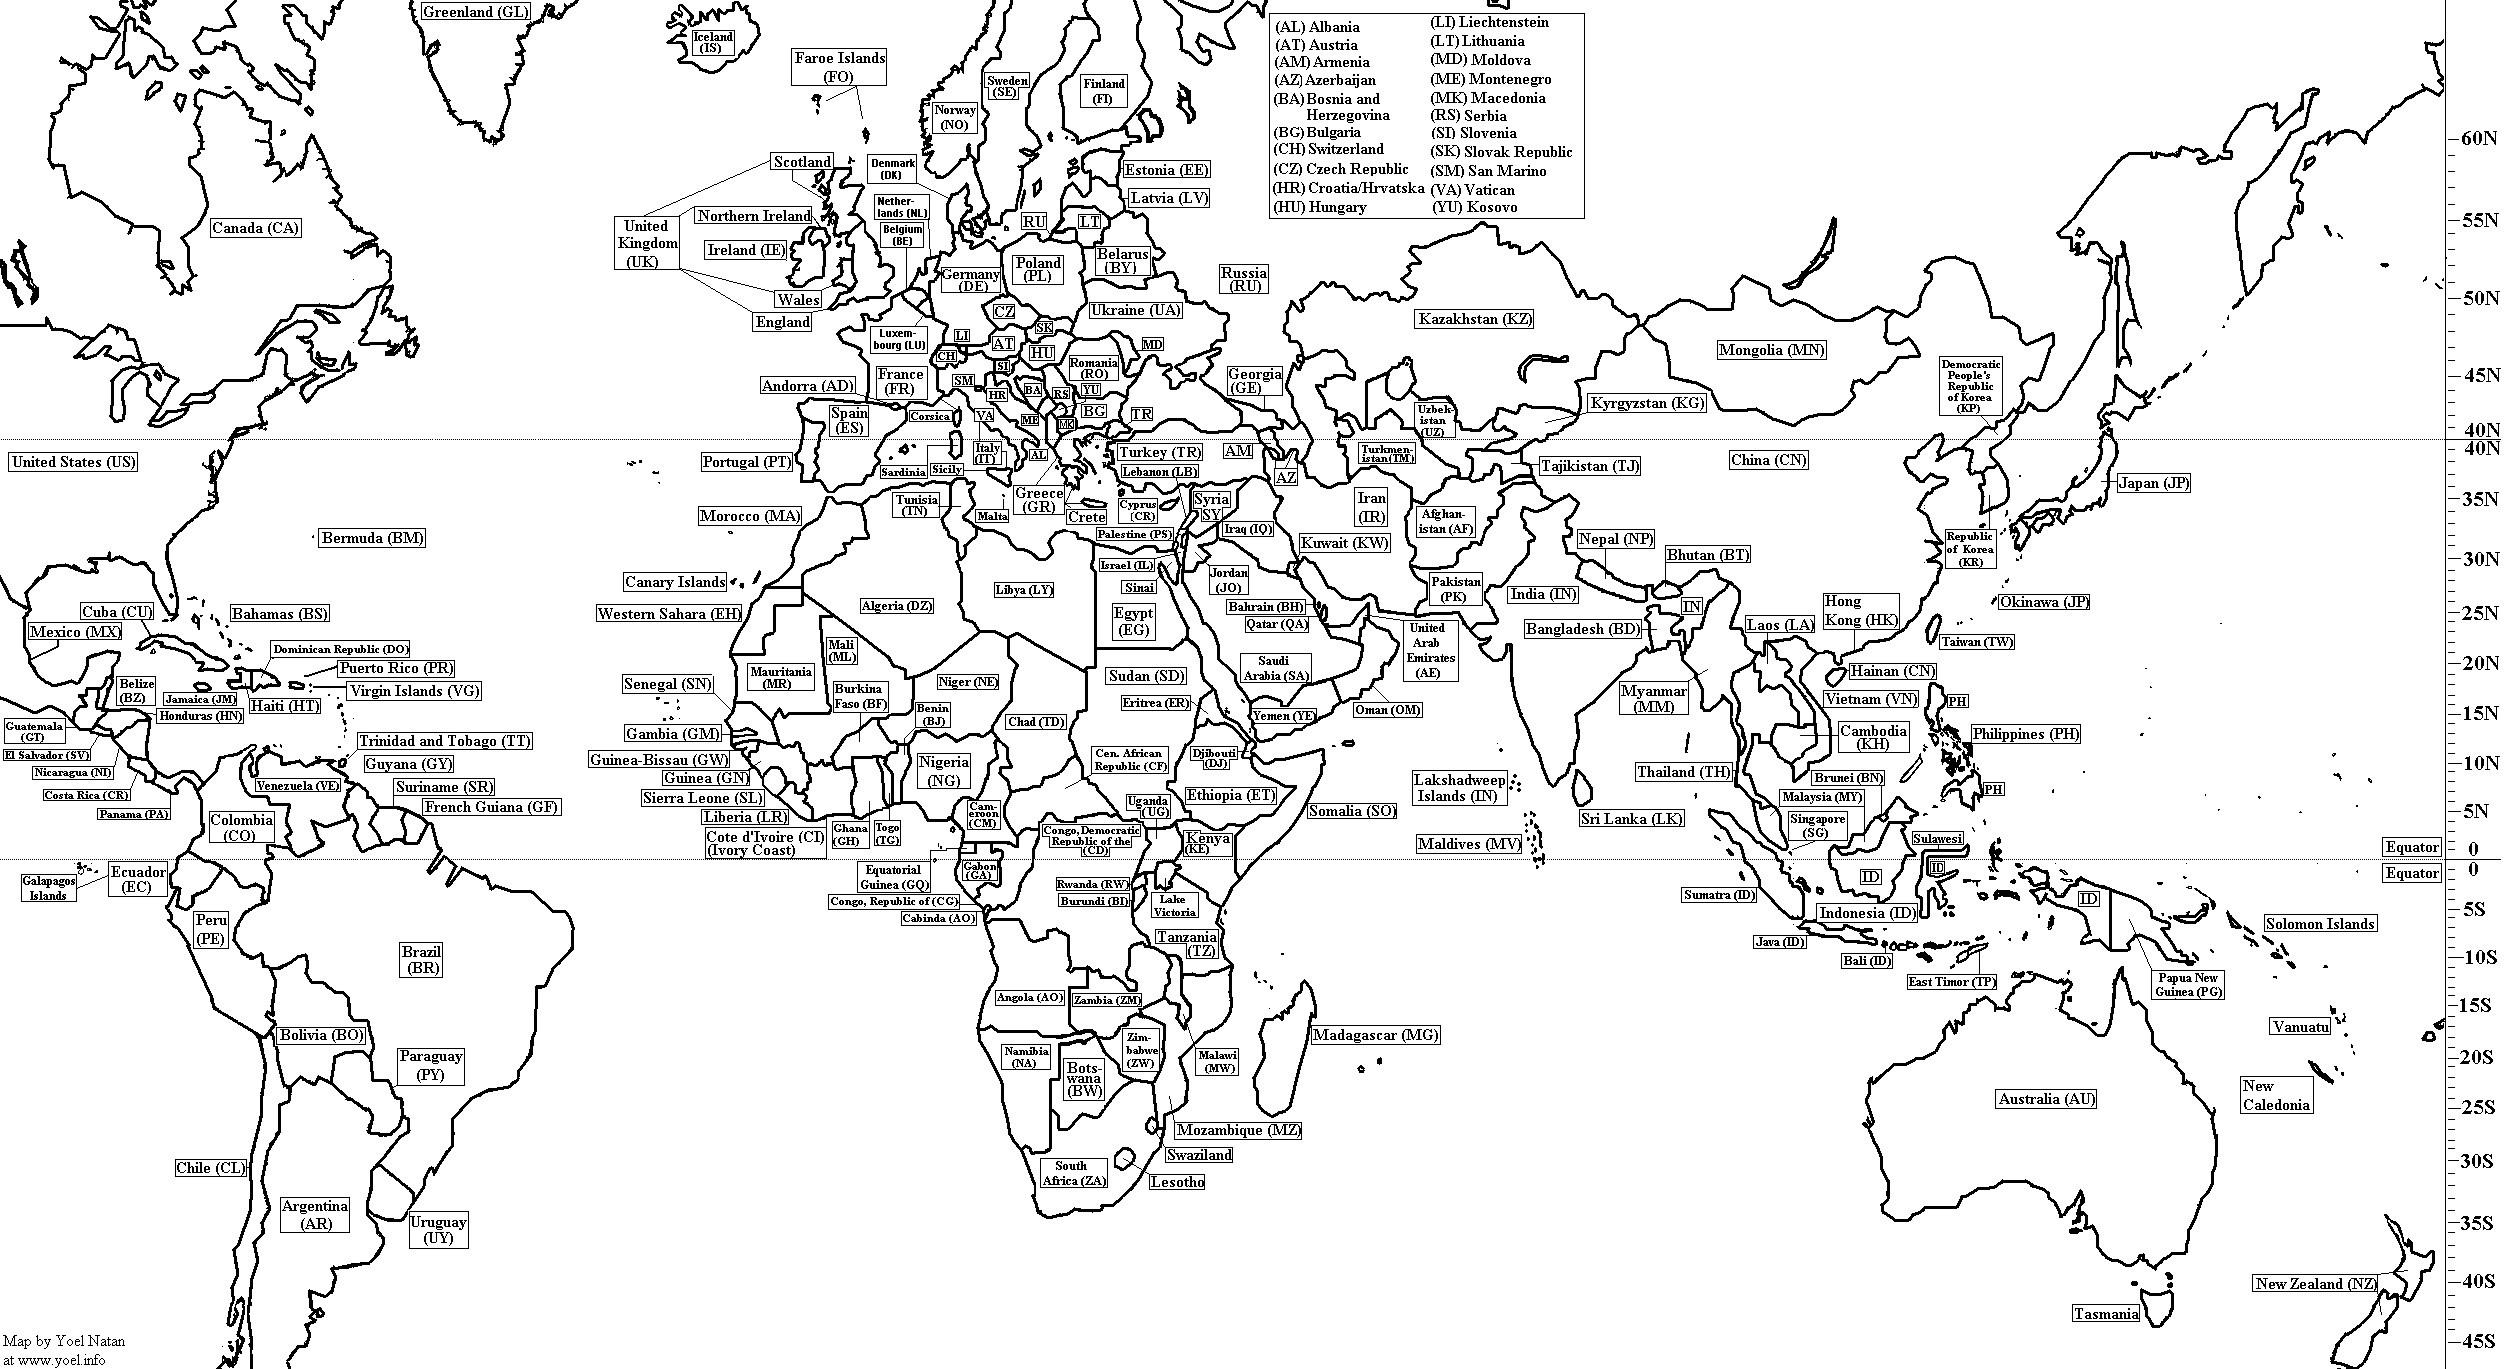 Printable World Map With Countries Me Best Of 2 - World Wide Maps - Printable World Map With Countries